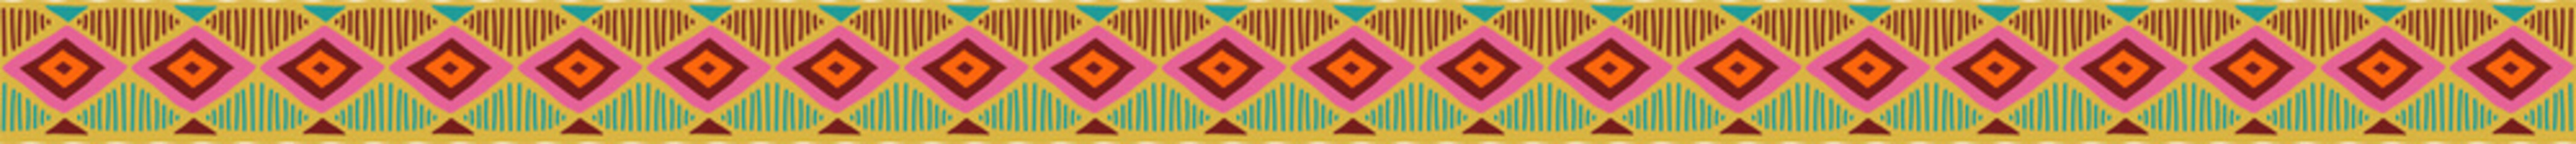 Wall Mural - Divider with traditional seamless pattern. Colorful decorative tribal border. 